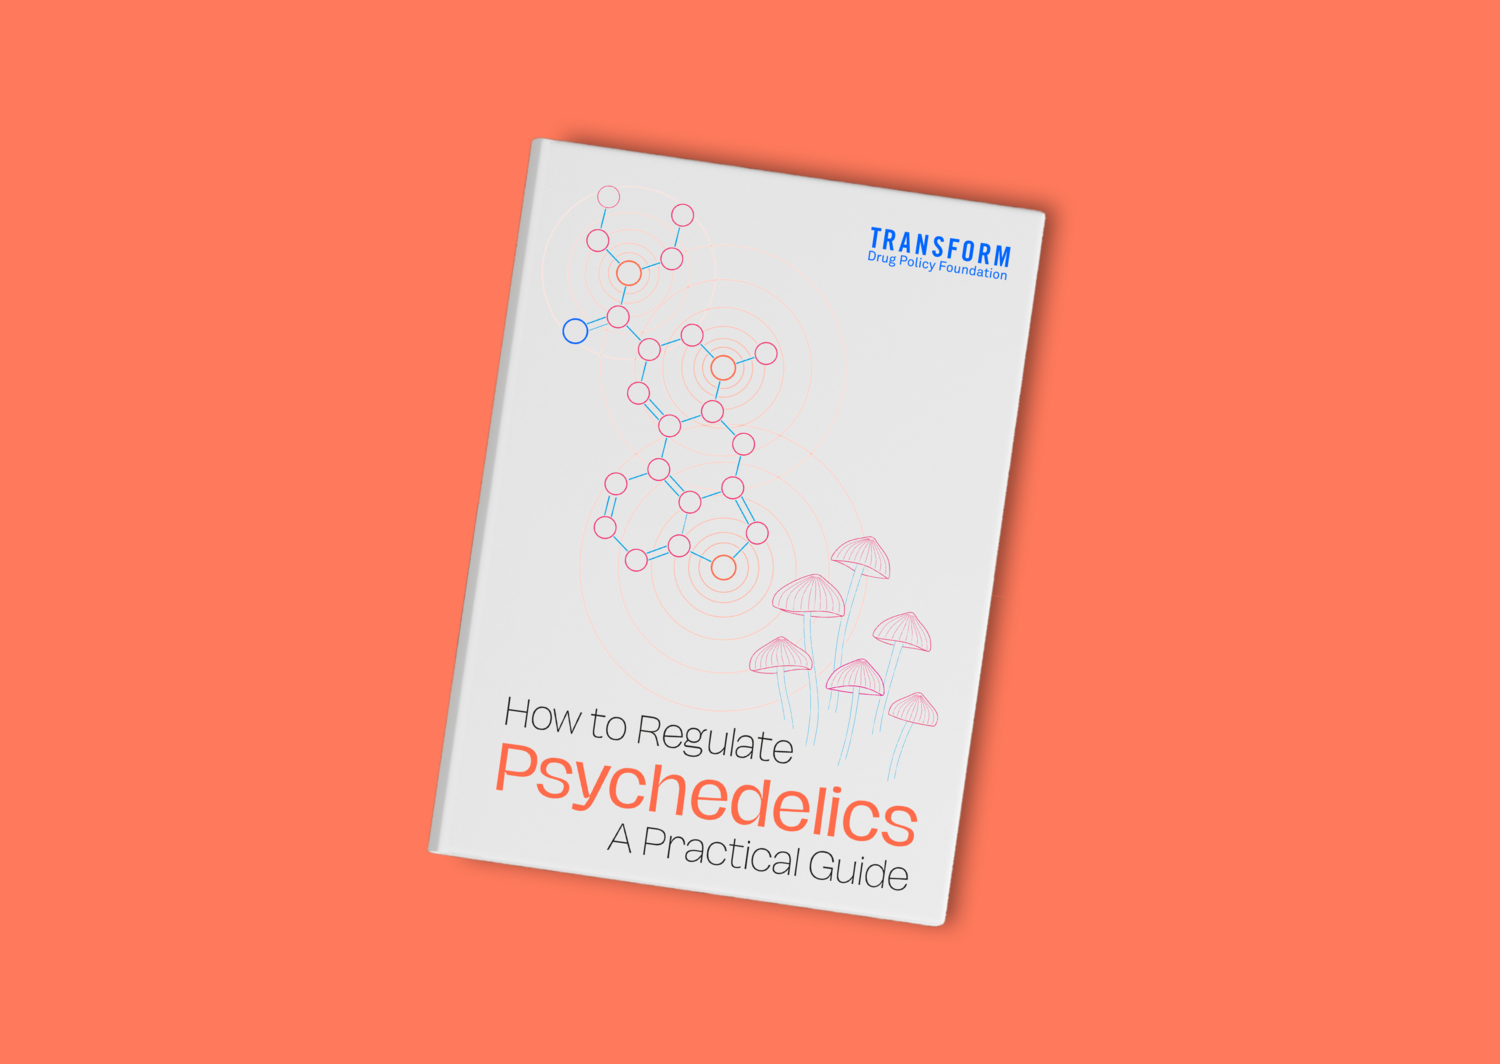 How To Regulate Psychedelics: A Practical Guide